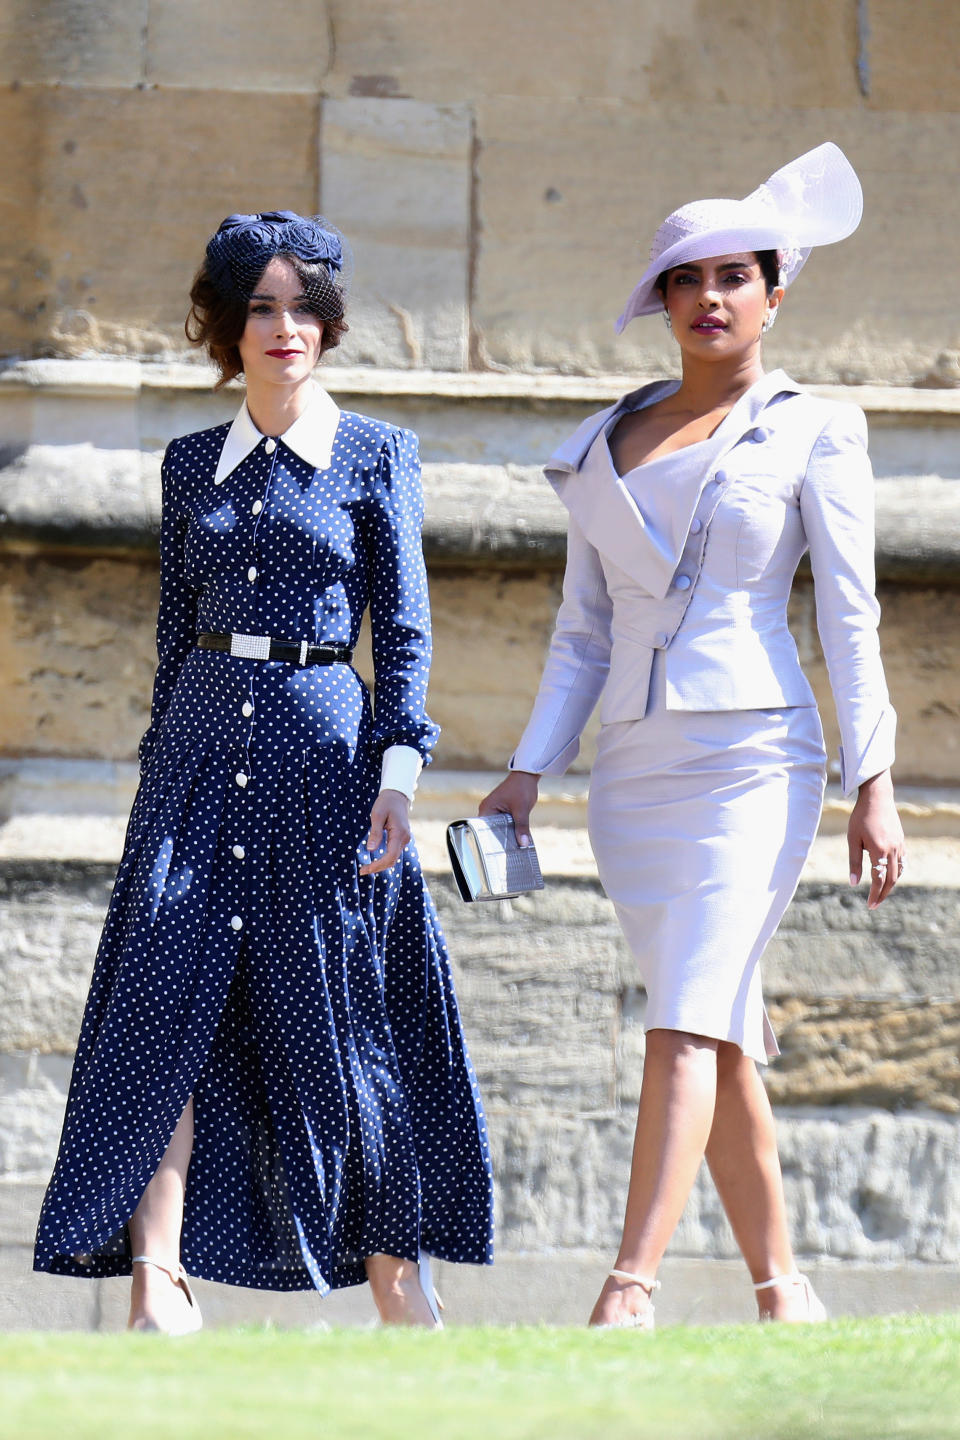 Priyanka Chopra famously attended the royal wedding – here, she is pictured with ‘Suits’ actress Abigail Spencer [Photo: Getty]